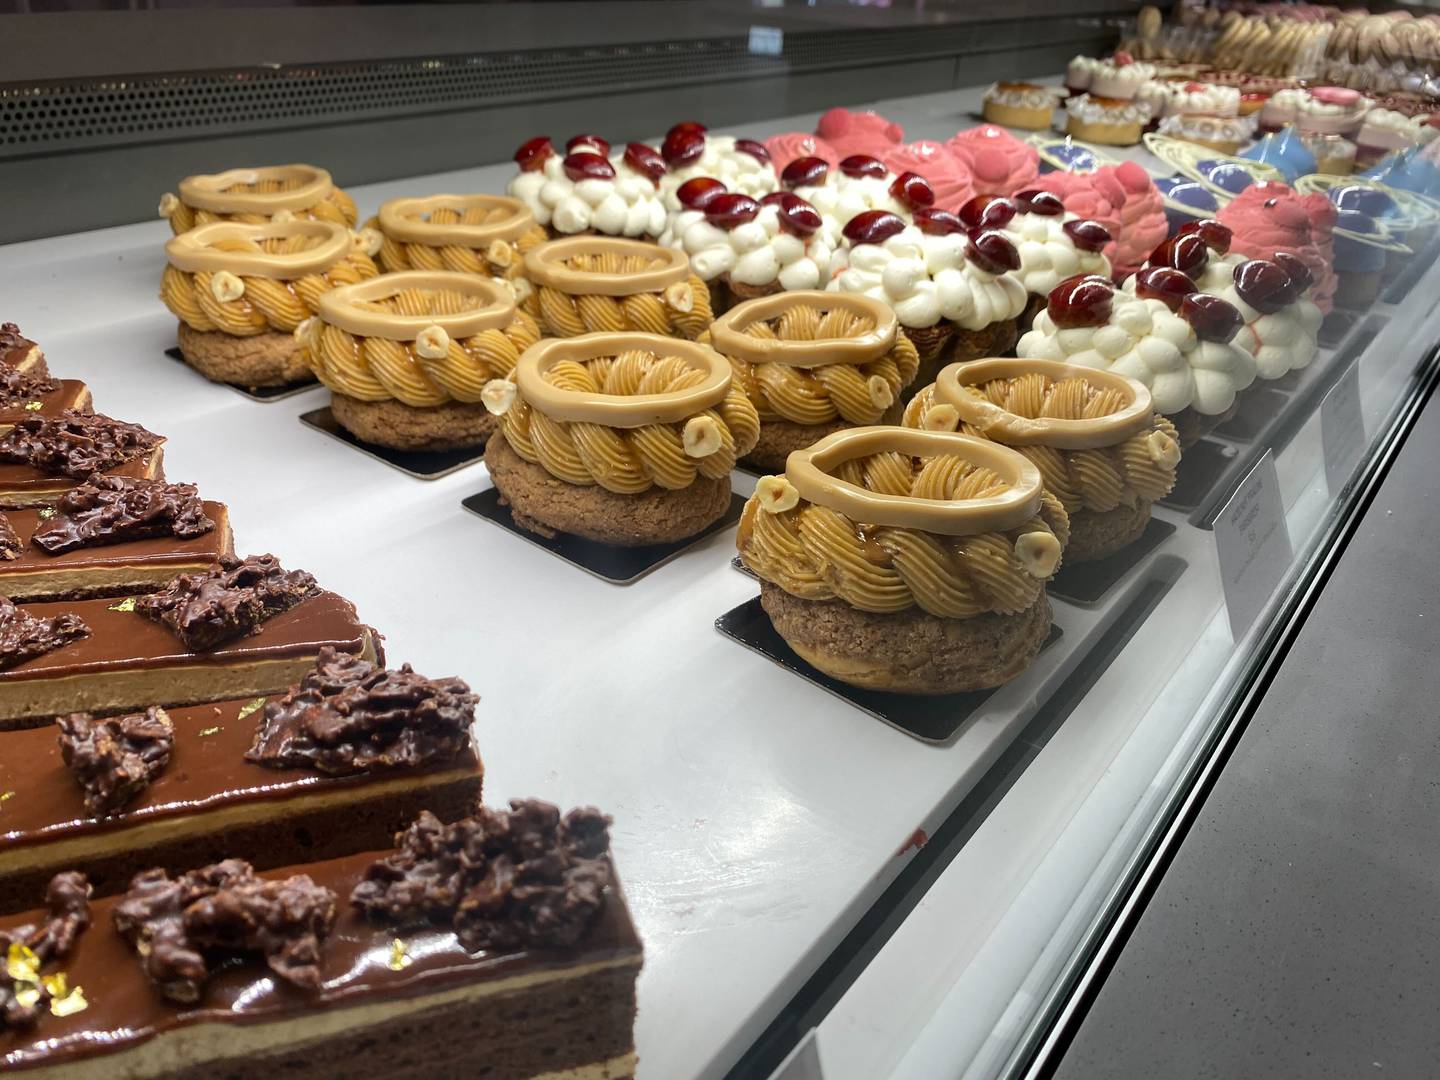 Pastries for sale appear behind glass, including chocolate eclairs, a brown butter-cream frosted pastry and a fluffy white frosted pastry with a red cherry on top.